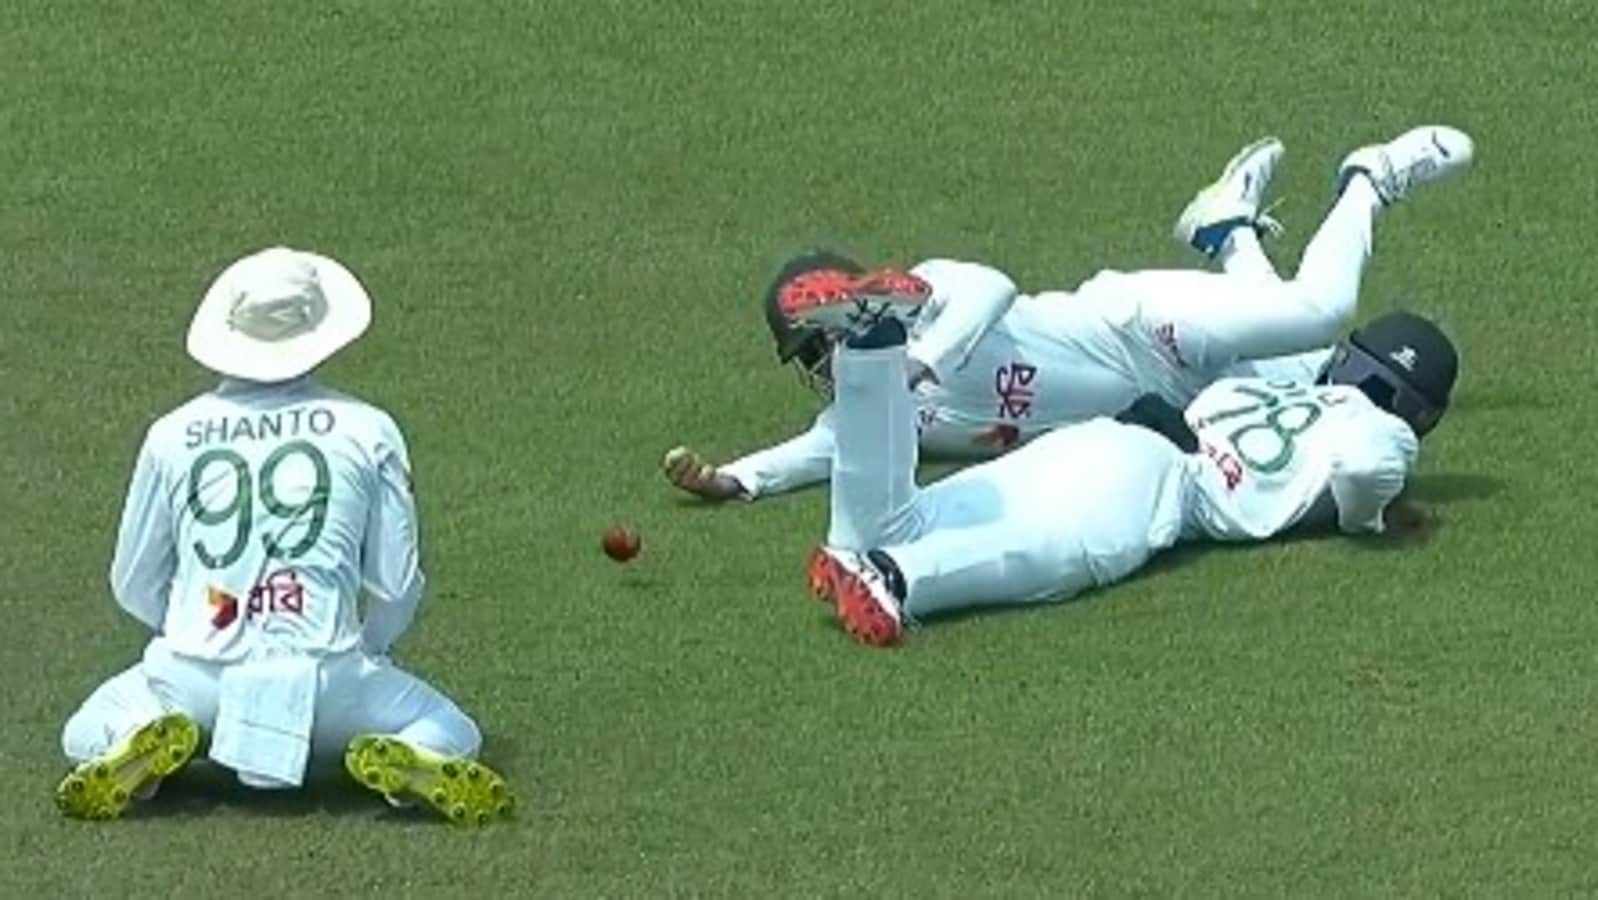 Bangladesh's Trio of Slip Fielders Commit Unbelievable Blunder with Shocking Dropped Catch